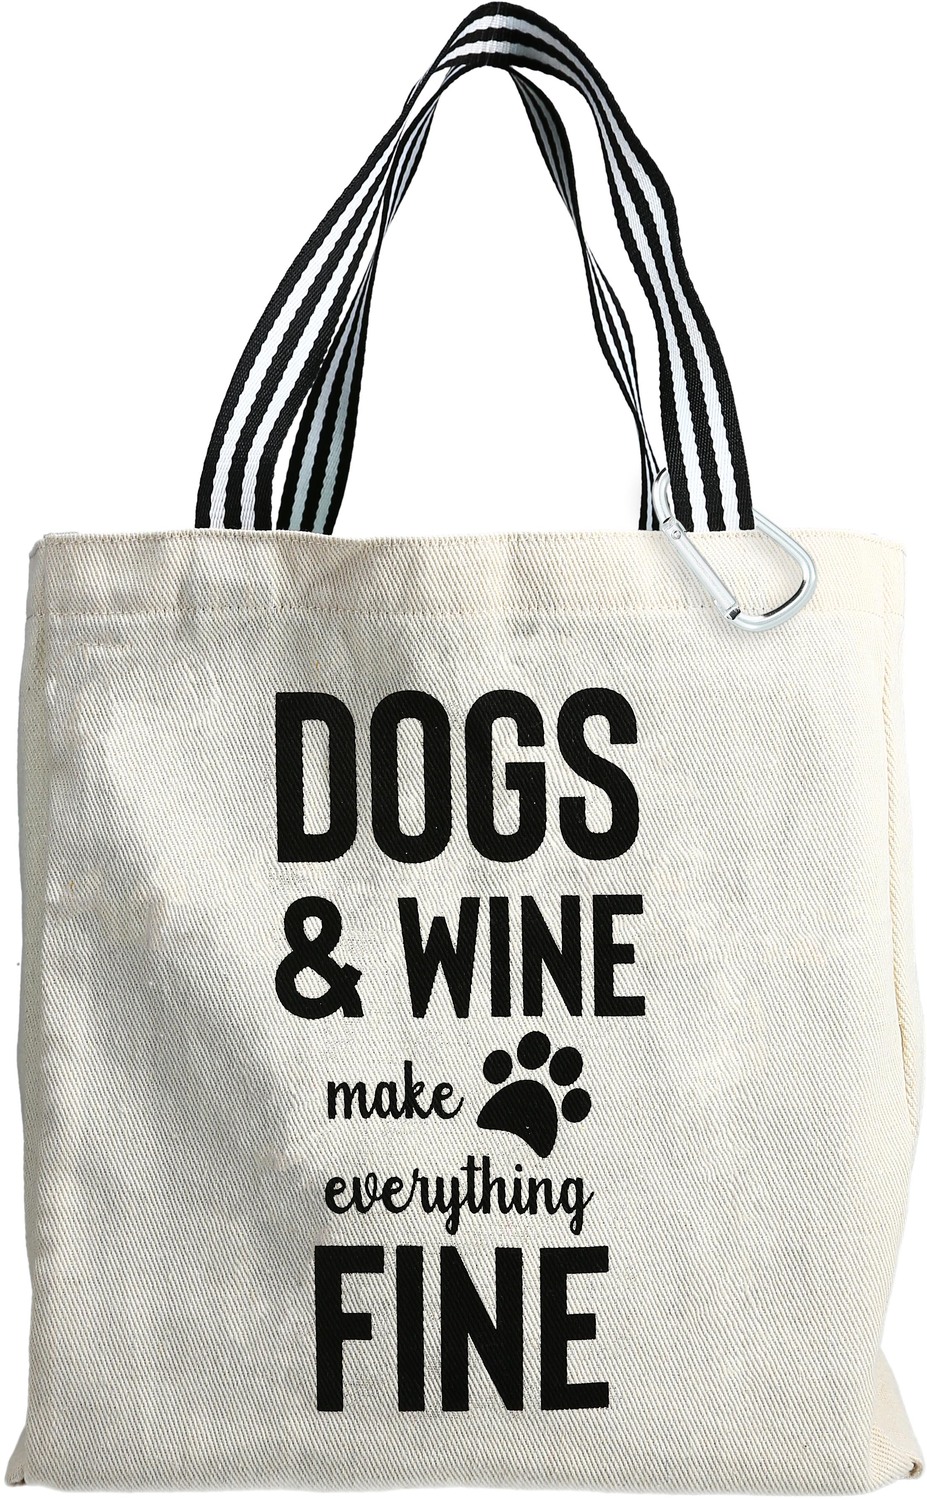 Dogs & Wine by Check Me Out - Dogs & Wine - 100% Cotton Twill Gift Bag